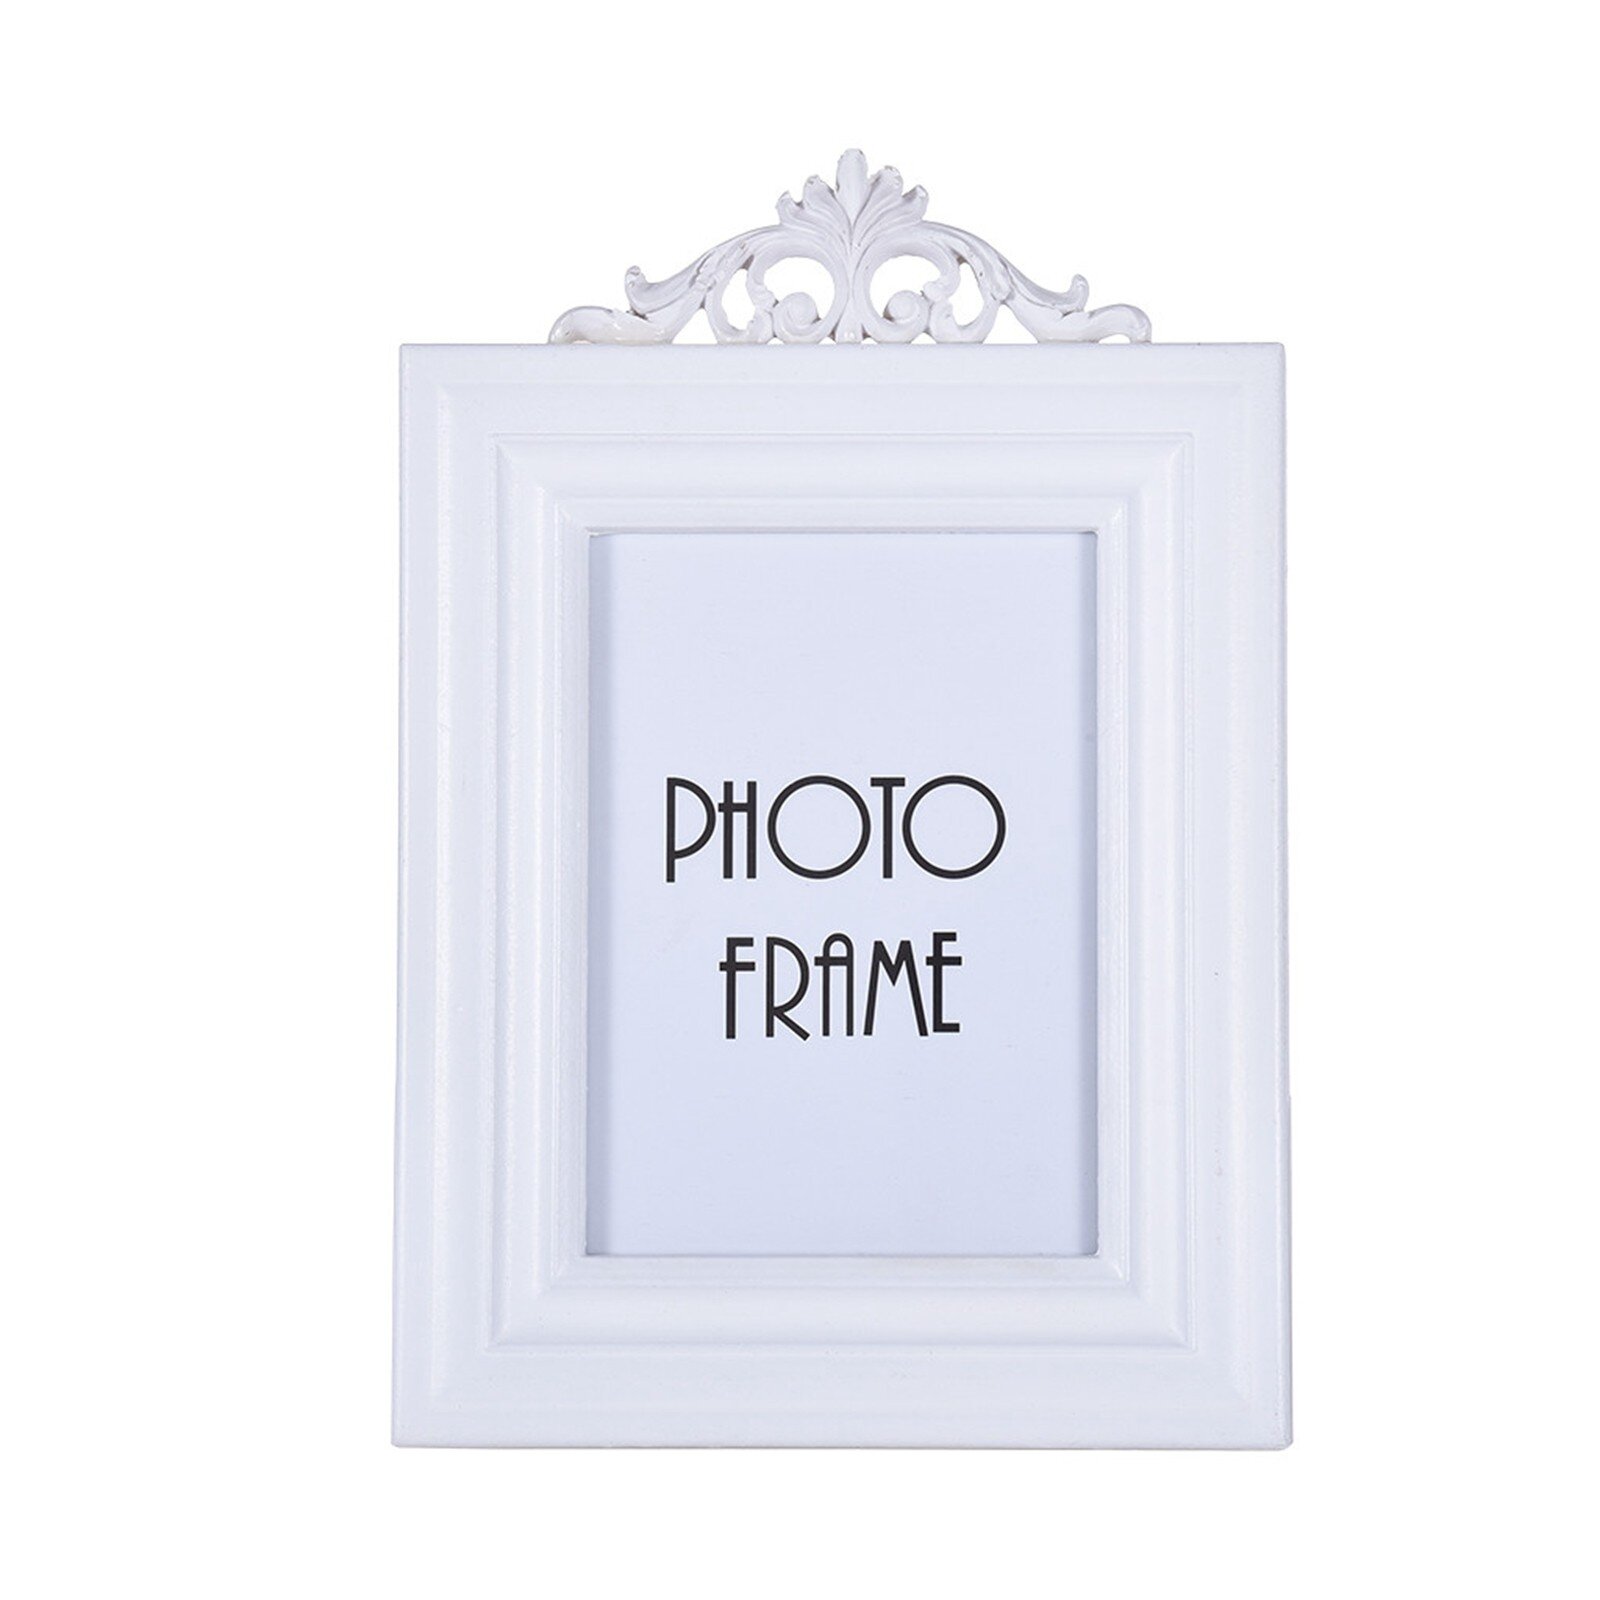 Photo Frame Poster frame with Bespoke Mount Black Details about   Ornate Shabby Chic Picture